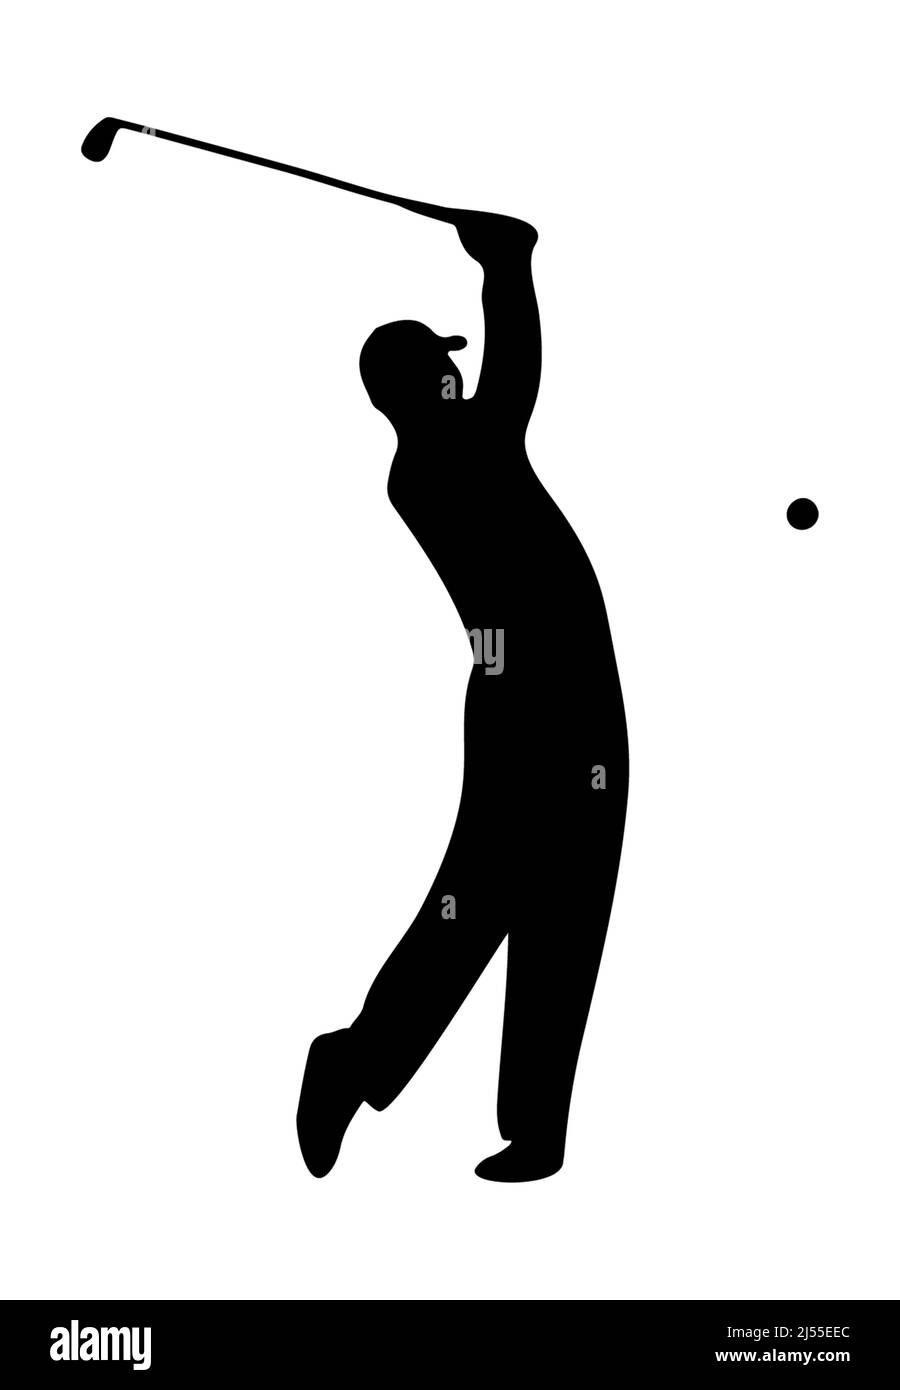 Golfing guy swinging at a golf ball silhouette graphic on a white background for this popular sport. Stock Photo